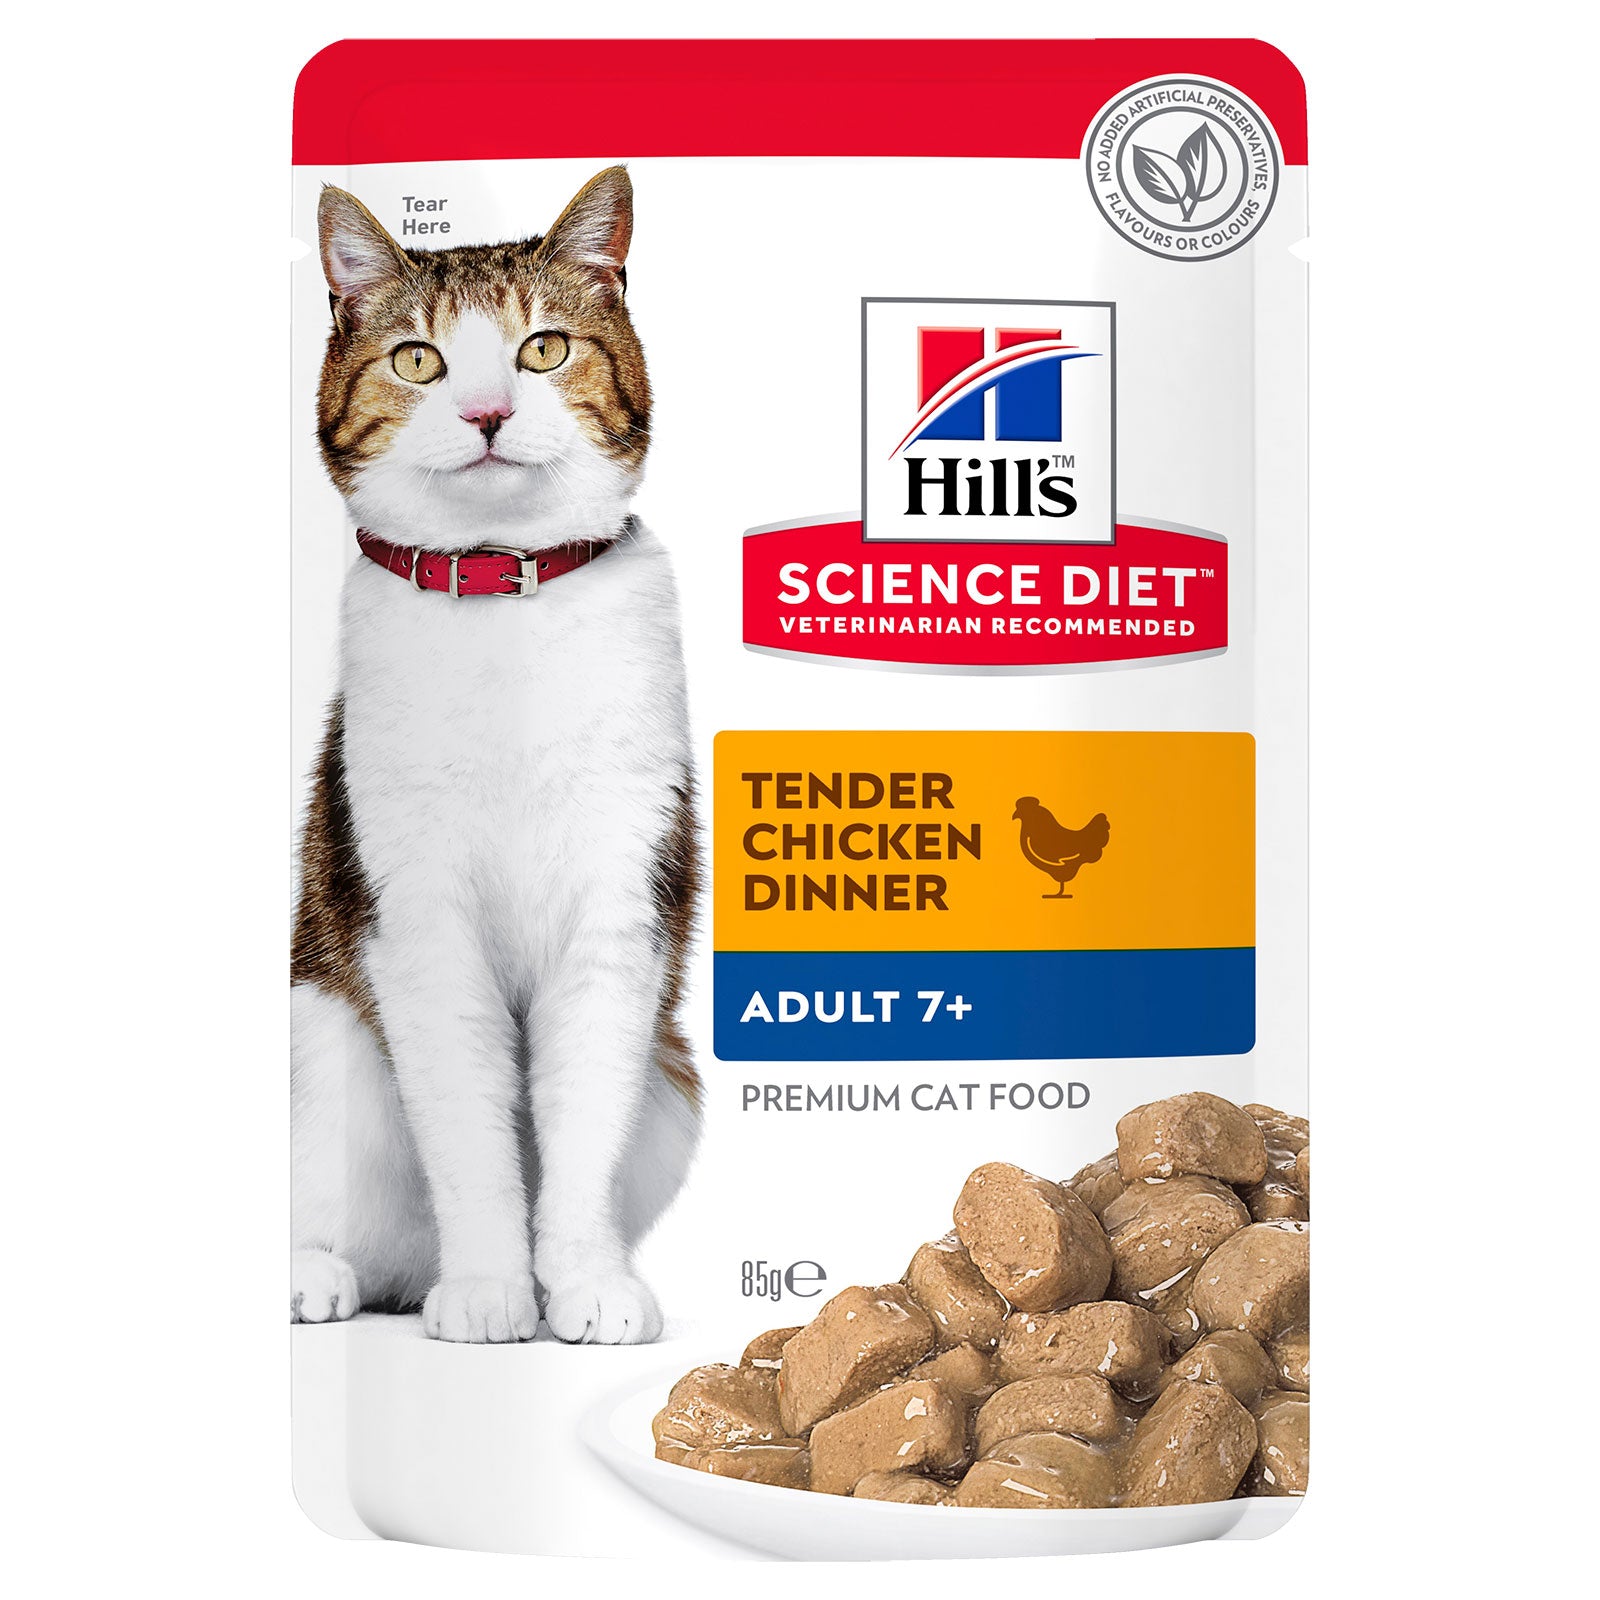 Hill's Science Diet Cat Food Pouch Adult 7+ Chicken